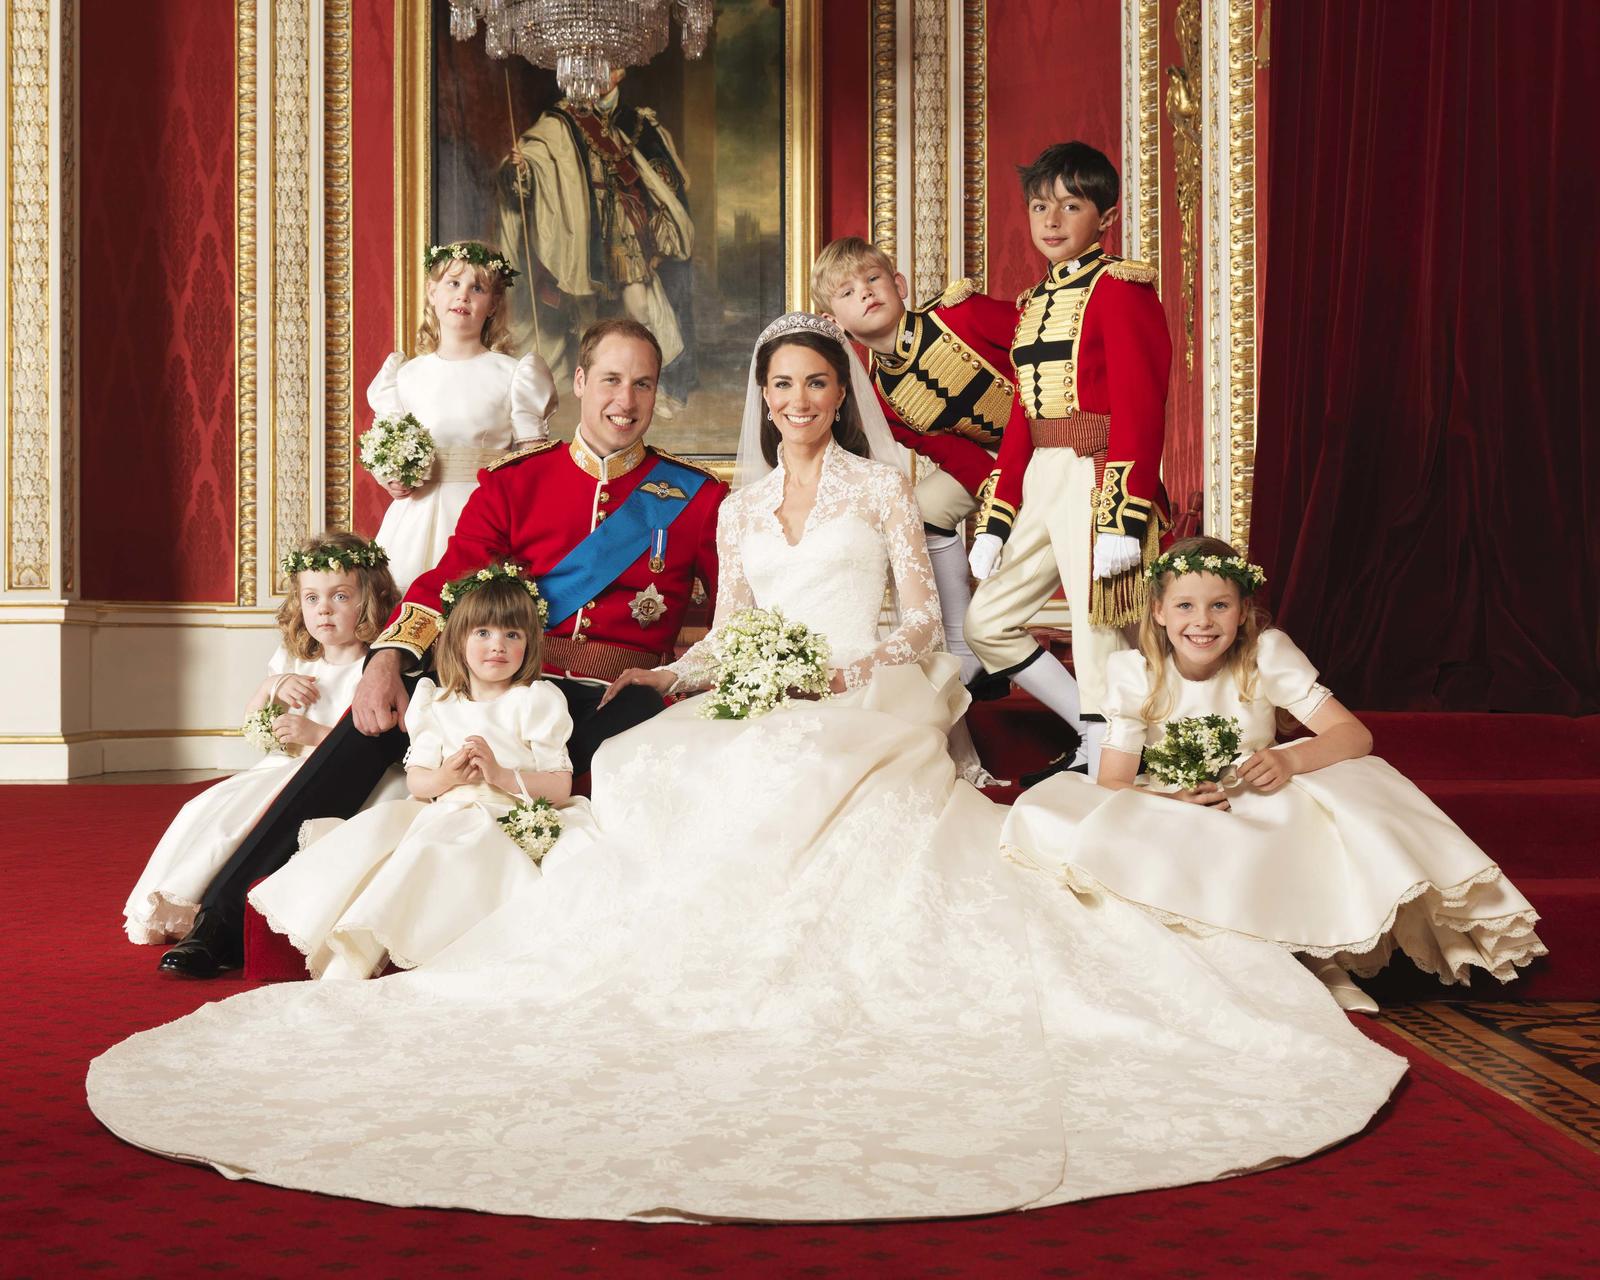 File photograph shows Britain’s Prince William and his bride Catherine, Duchess of Cambridge, posing for an official photograph on the day of their wedding, in central London